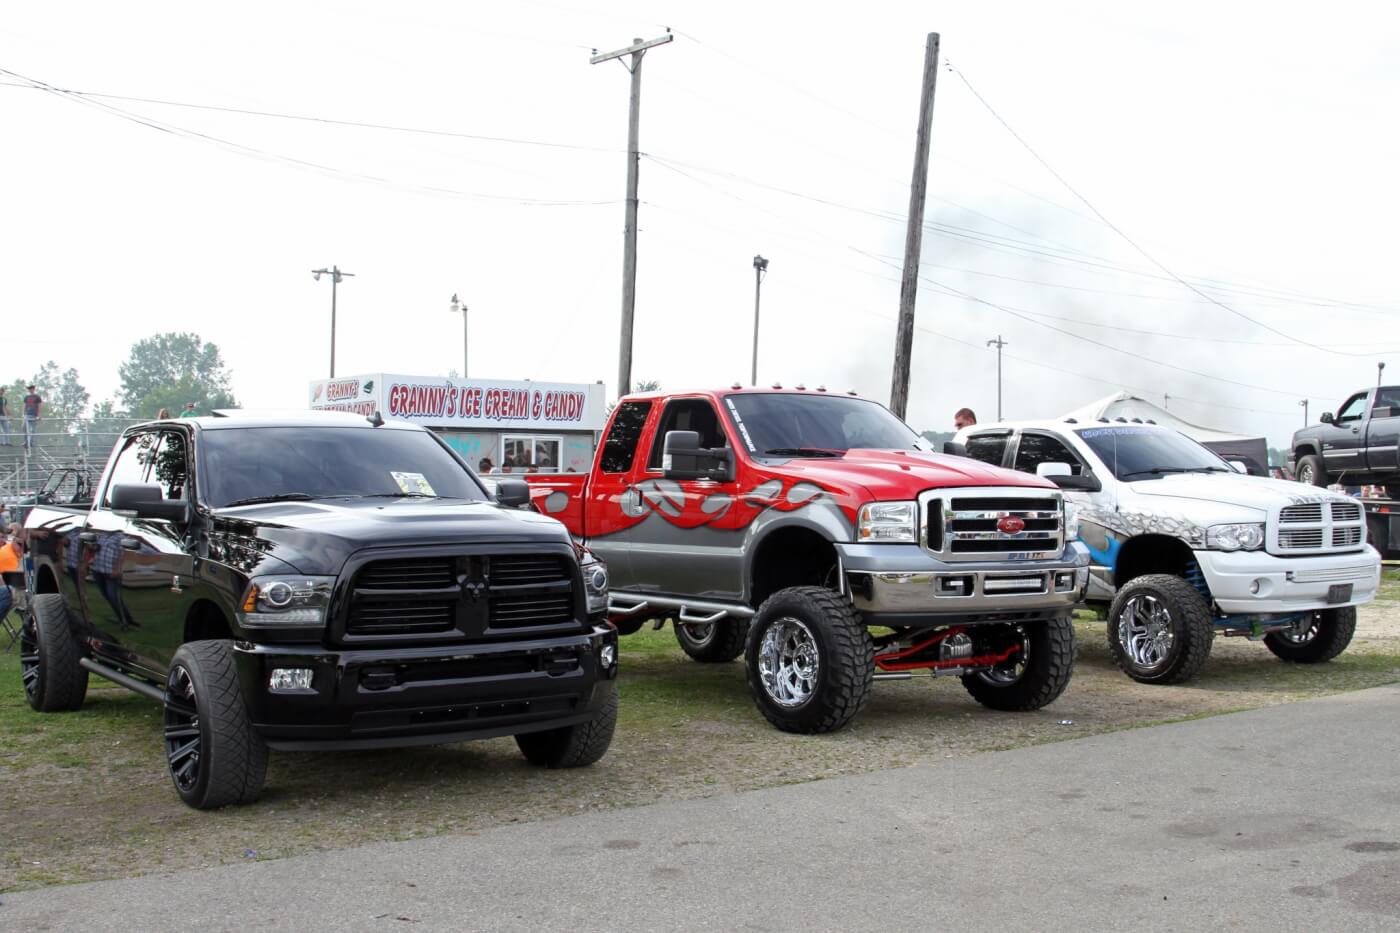 In a crowded field of show-n-shine competitors, these three stood out and took the top three spots. From left to right: Anthony Karascewski took first place with his ultra-clean Dodge; Trevor Selinger’s custom painted Ford was awarded second place, and Jacob Neuenschwander’s custom painted Dodge earned third place.